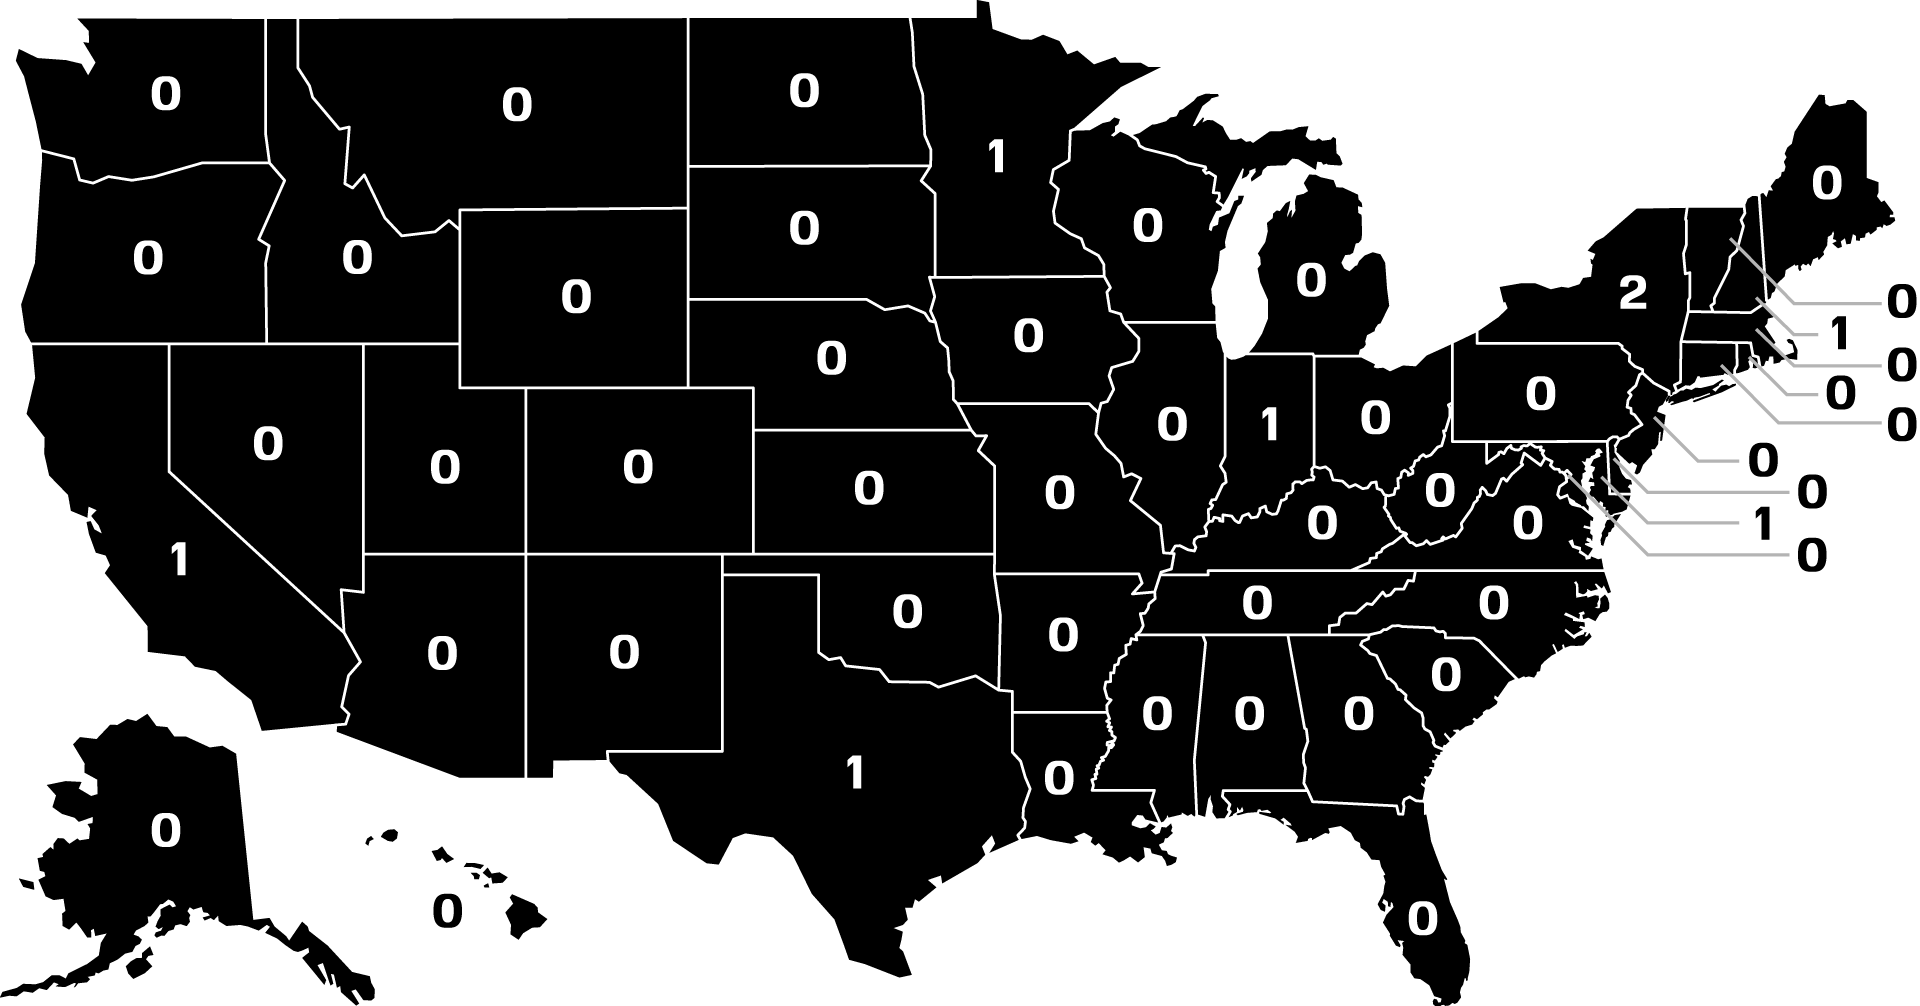 a map of the United States with the number of Radical Traditional Catholic groups in each state